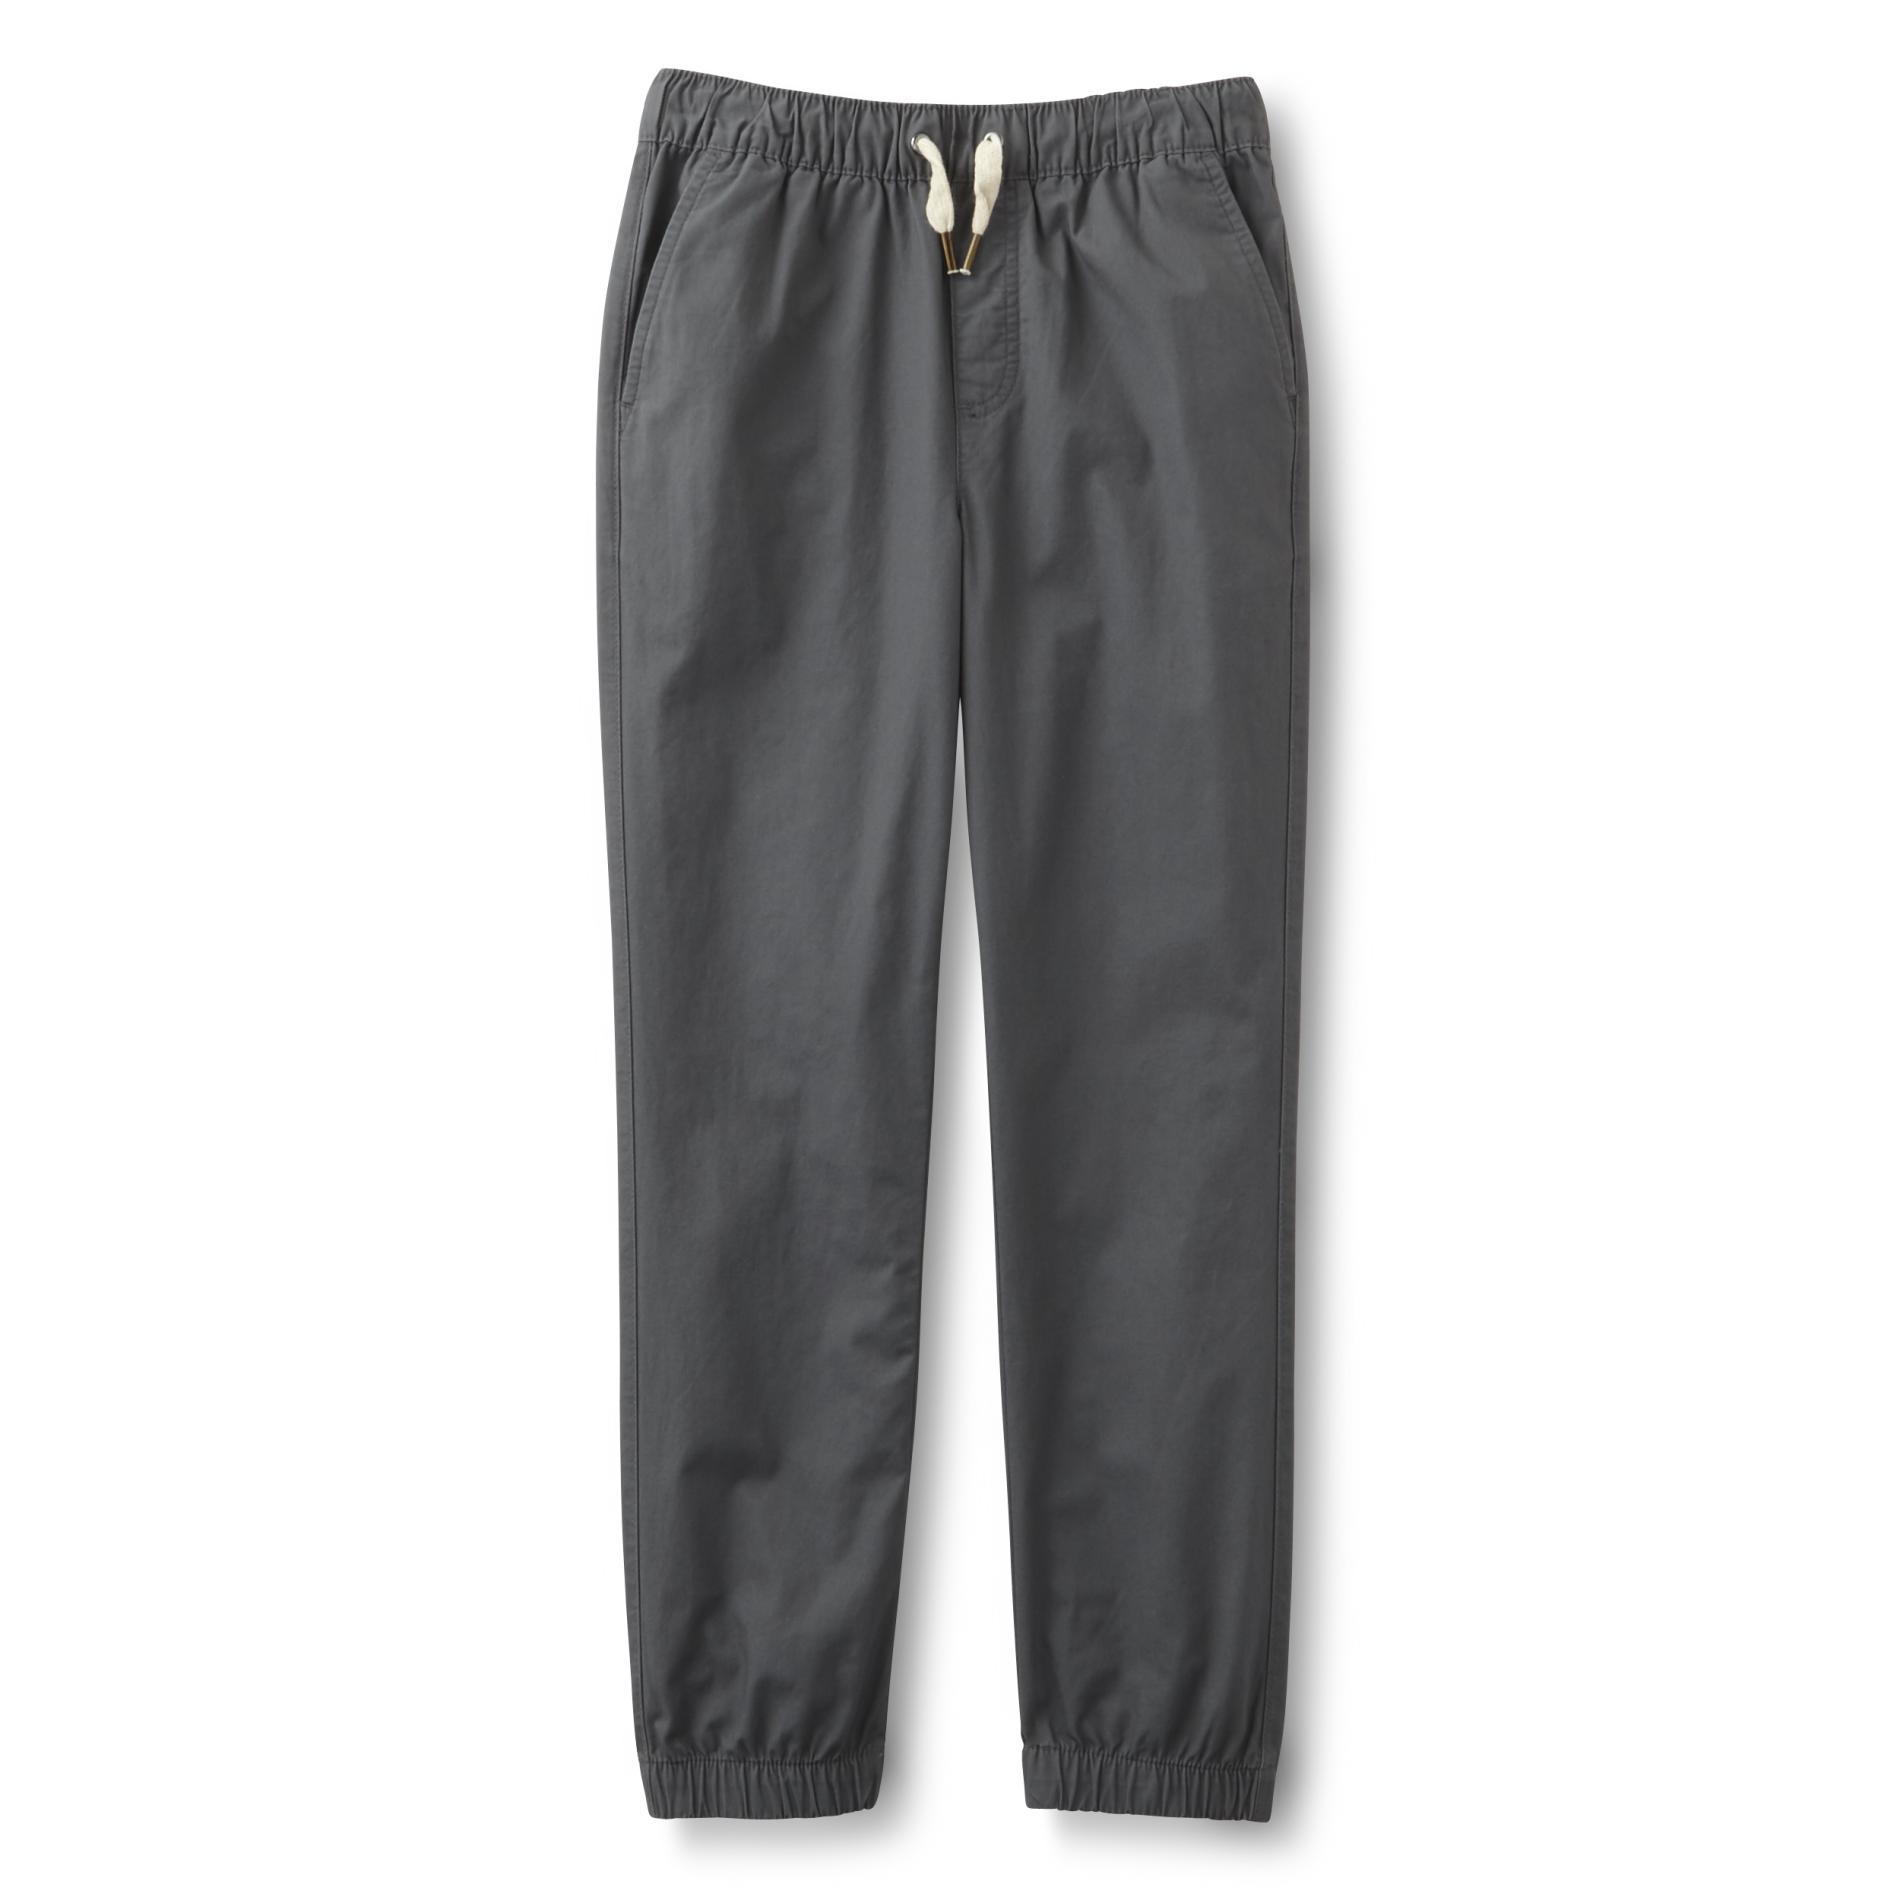 Simply Styled Boy's Canvas Jogger Pants